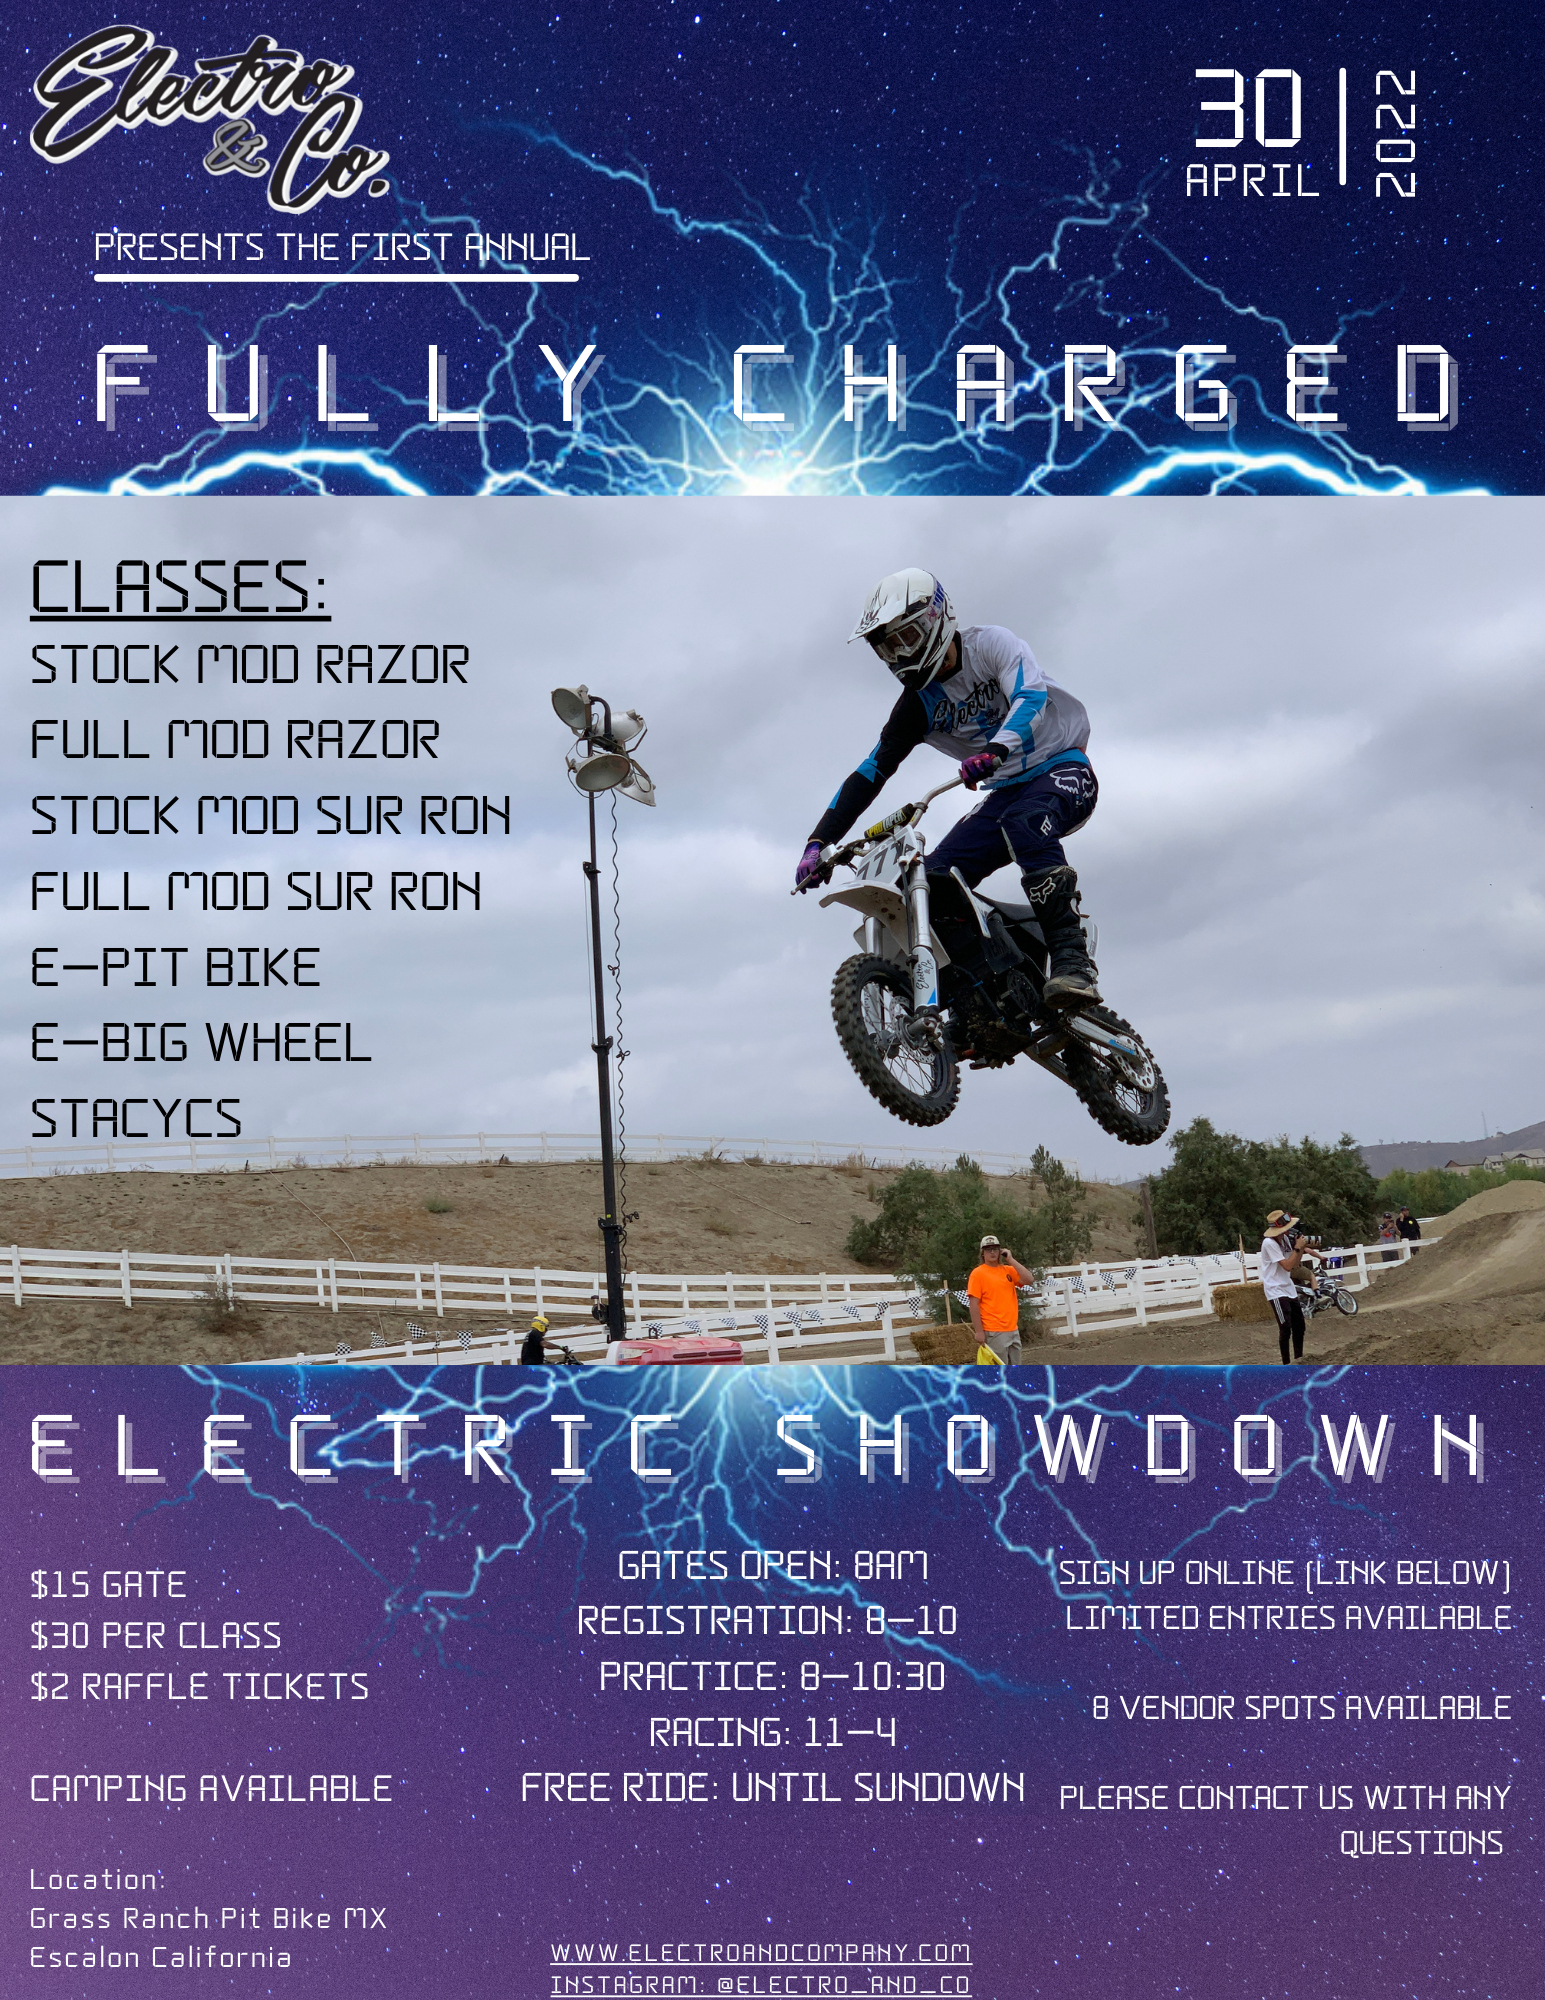 Fully Charged Electric Showdown Event - APRIL 30th